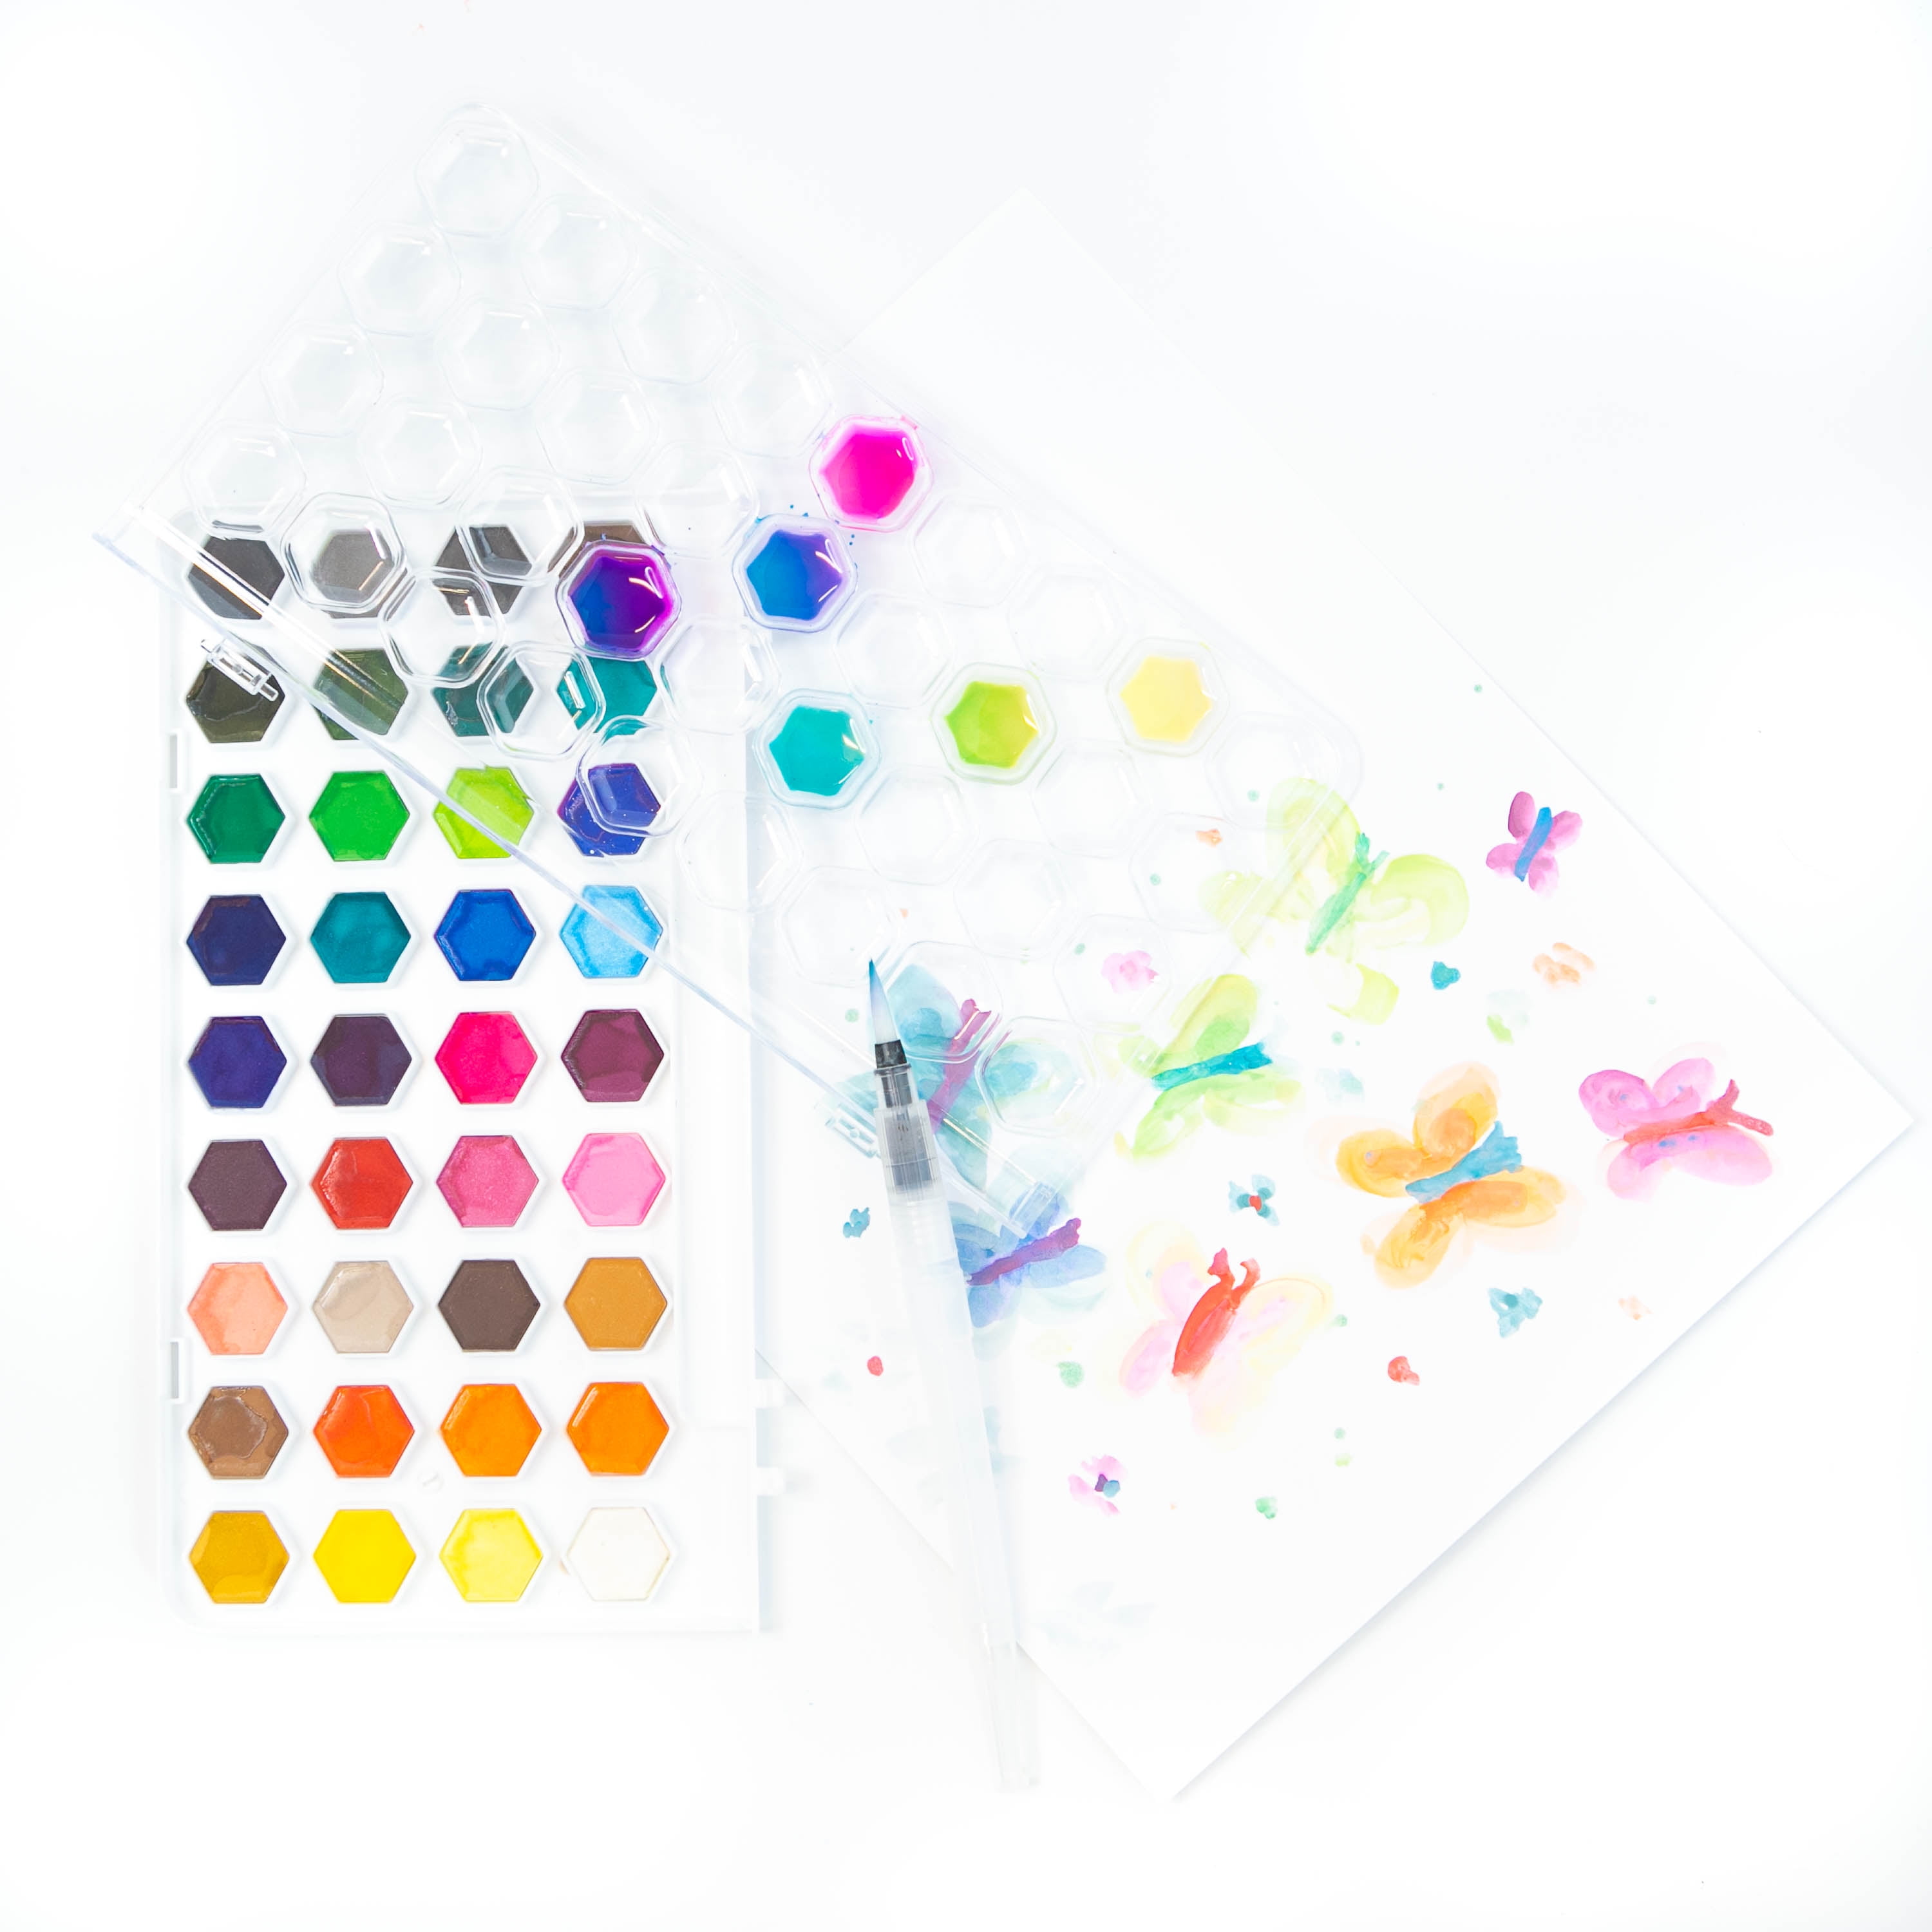 Watercolor Brush Set with Warm Water Color Pallet Stock Photo - Image of  paints, painting: 169096542